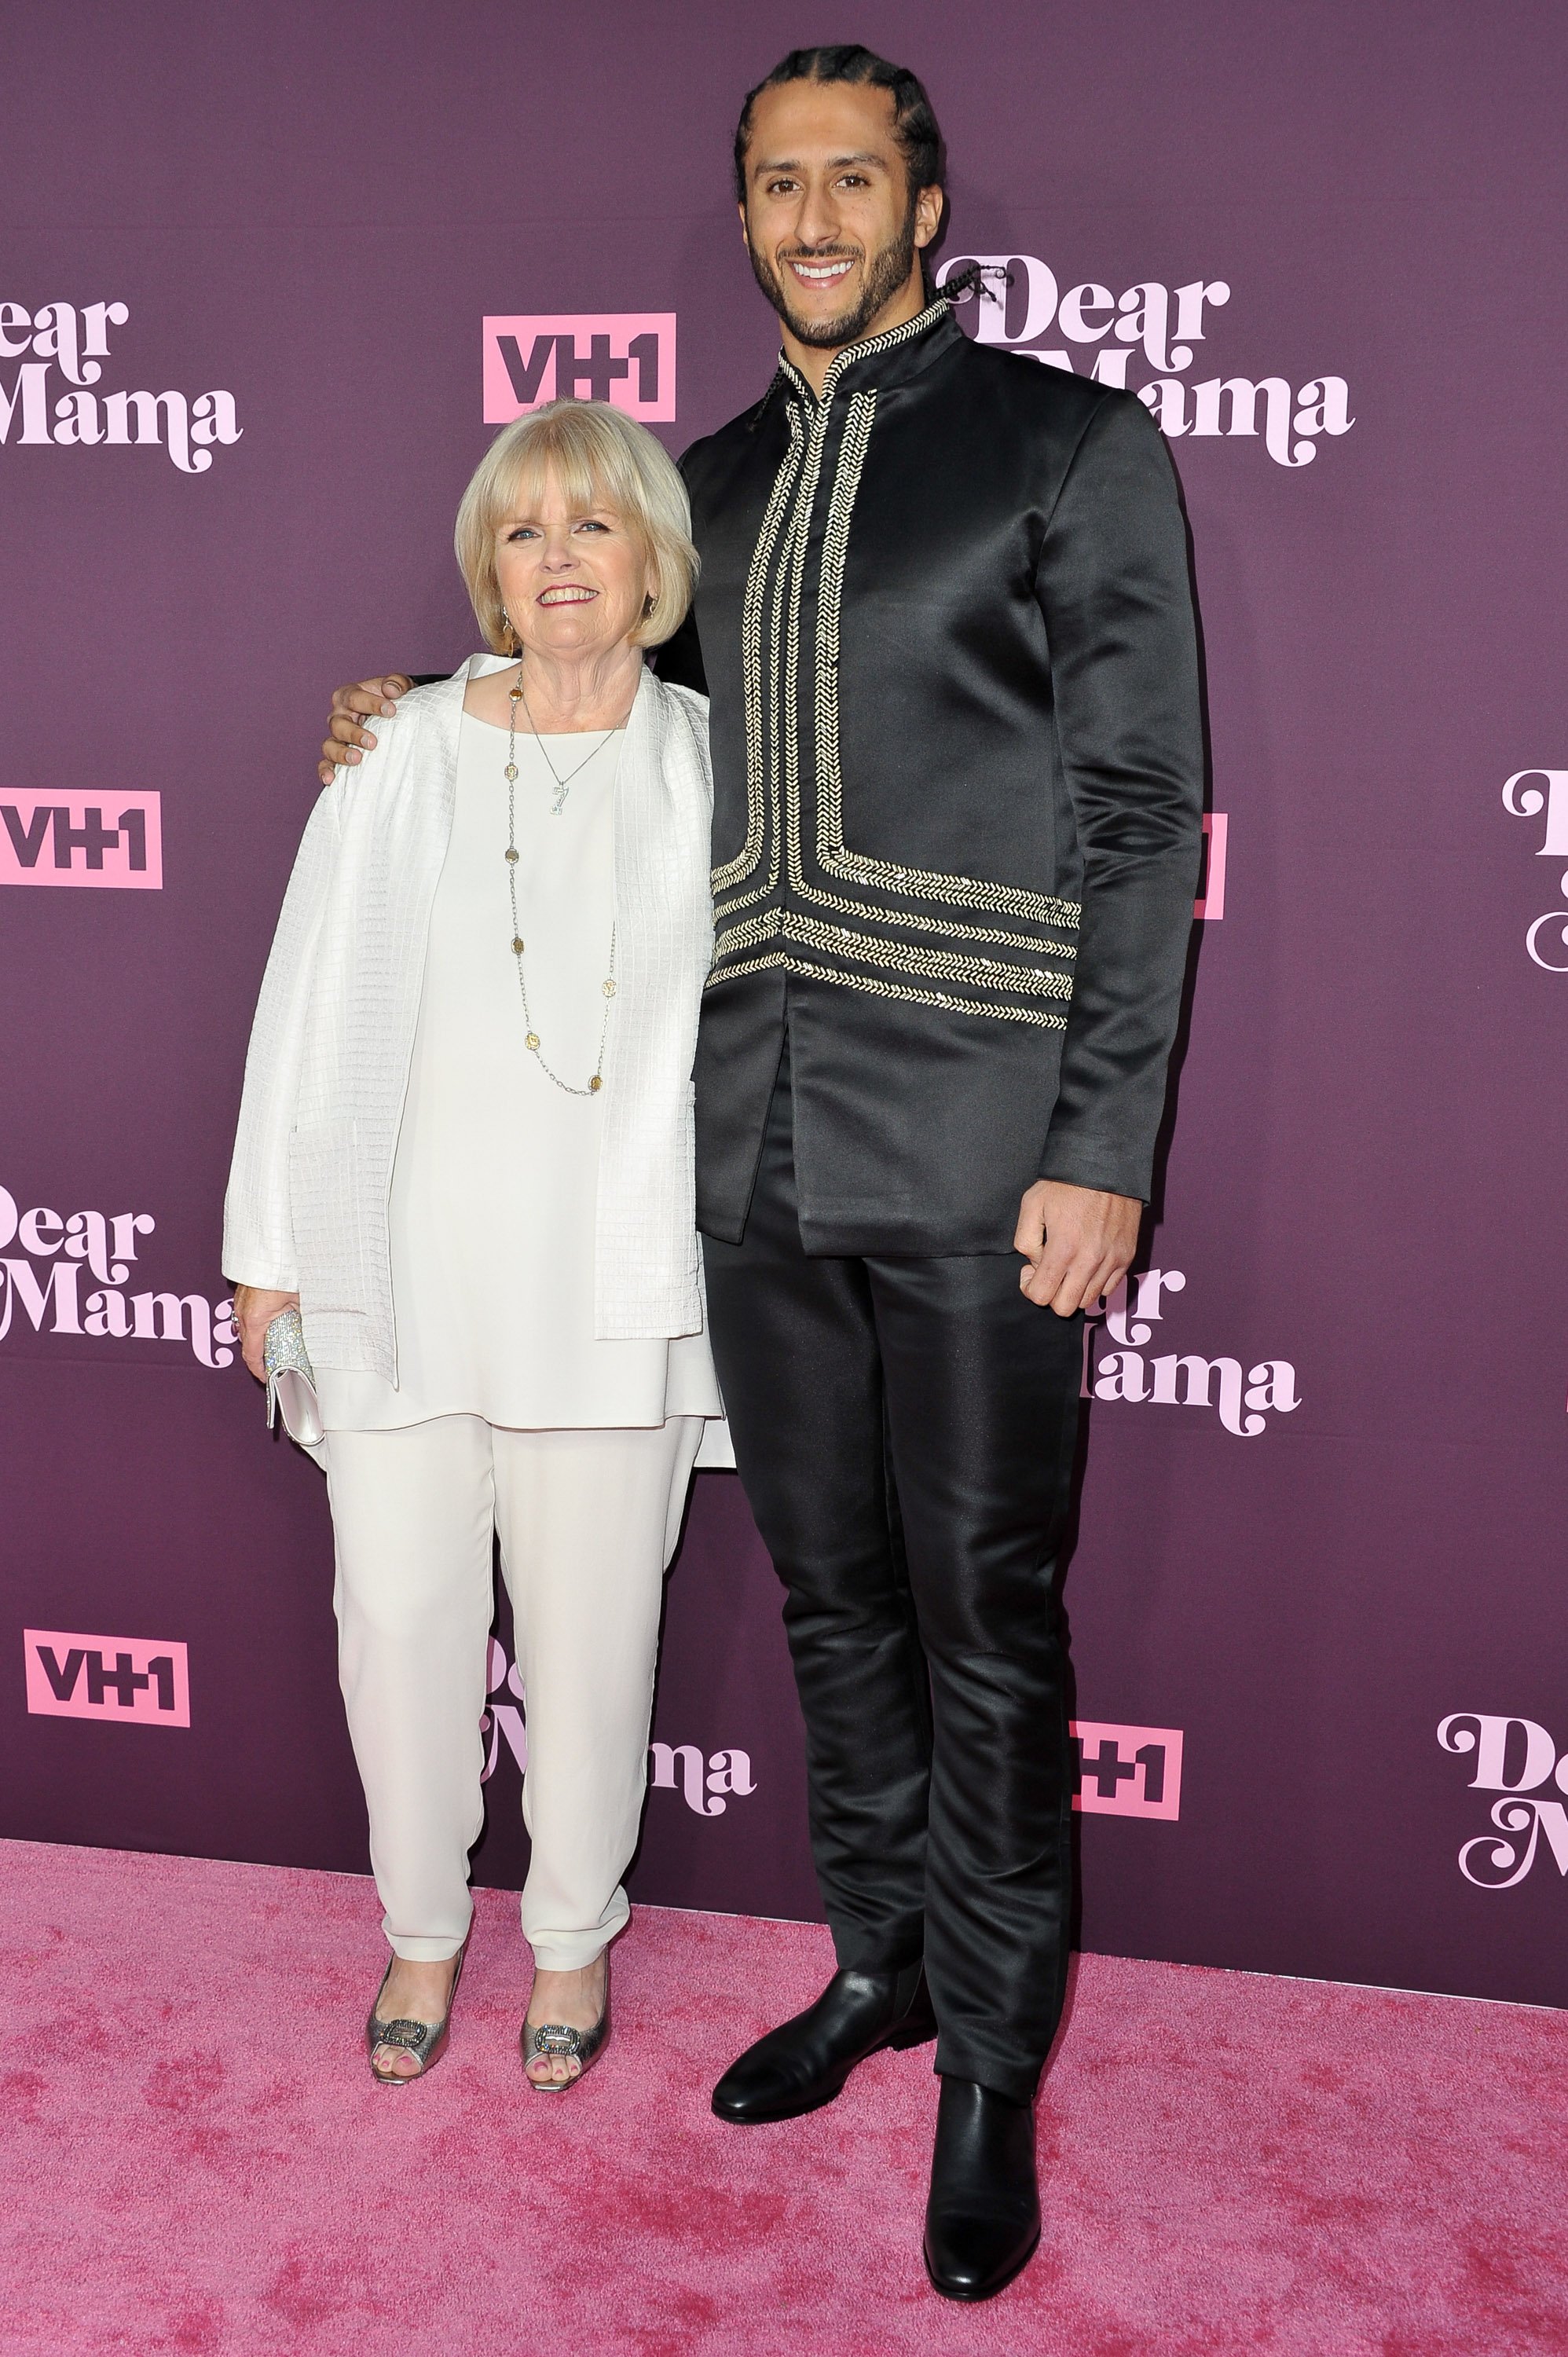 Colin Kaepernick and mom Teresa Kaepernick at VH1's 3rd Annual "Dear Mama: A Love Letter To Moms" in Los Angeles | Source: Getty Images